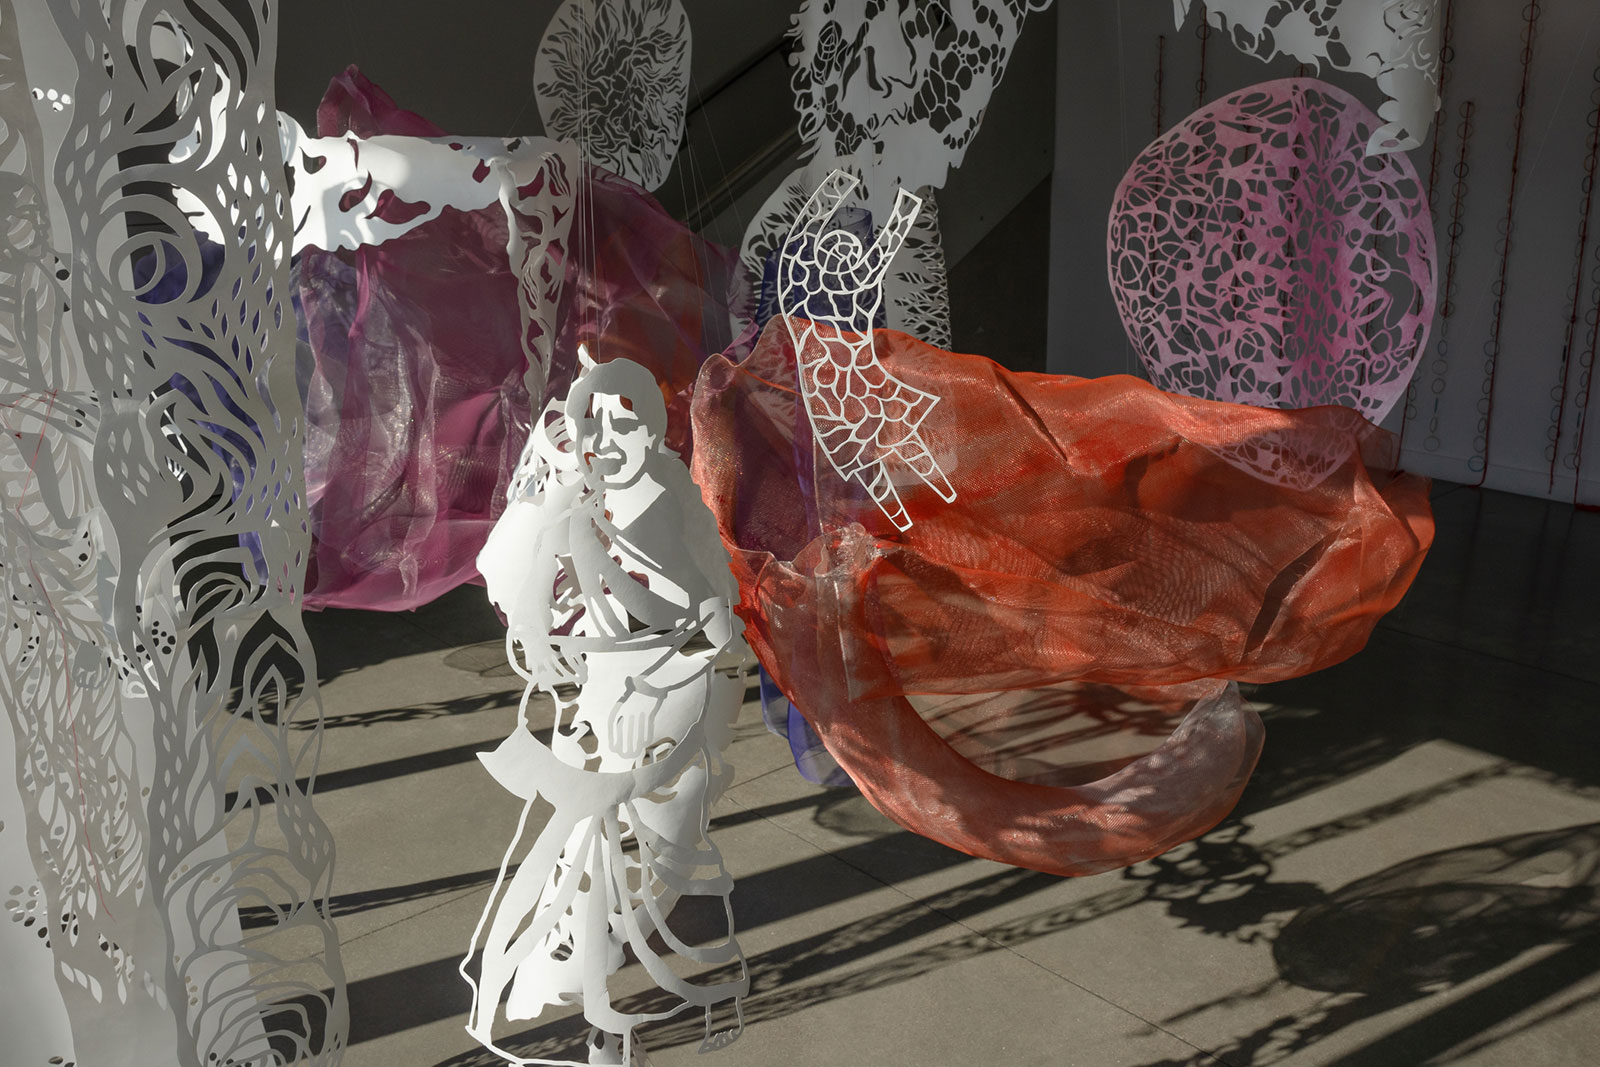 Paper cuttings of a woman and a child float hanging in an art gallery with pink and orange wire mesh in the background.